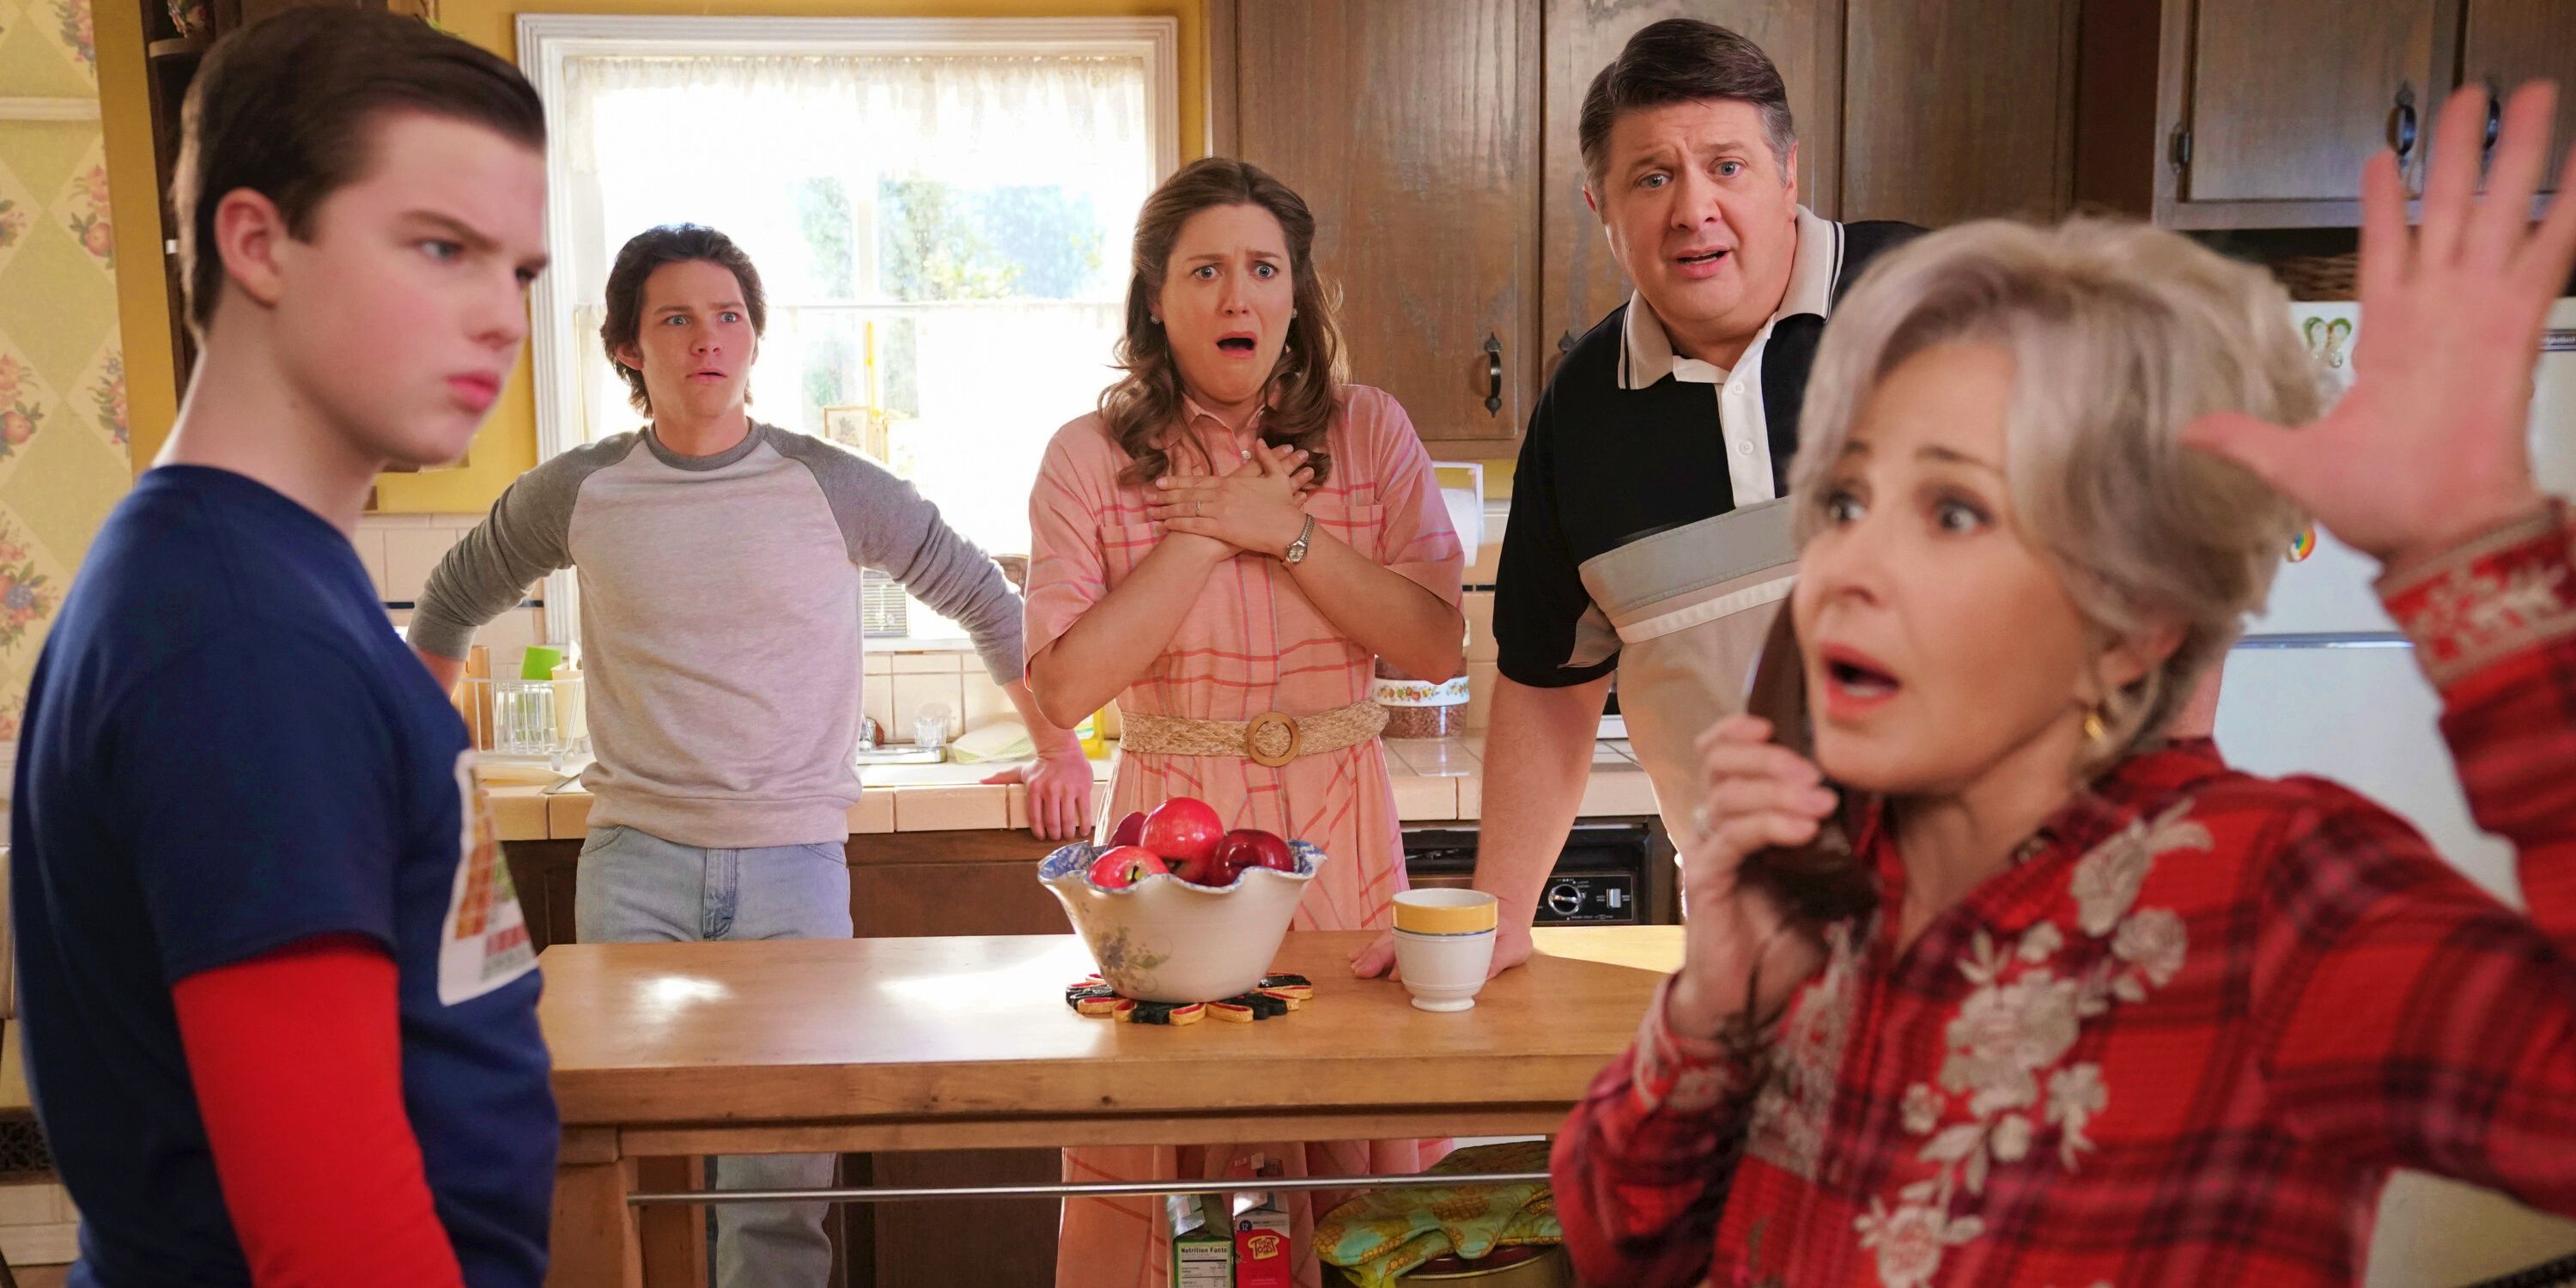 George, Mary, Georgie, and Sheldon looking at Meemaw with a shocked look in their faces in Young Sheldon season 6